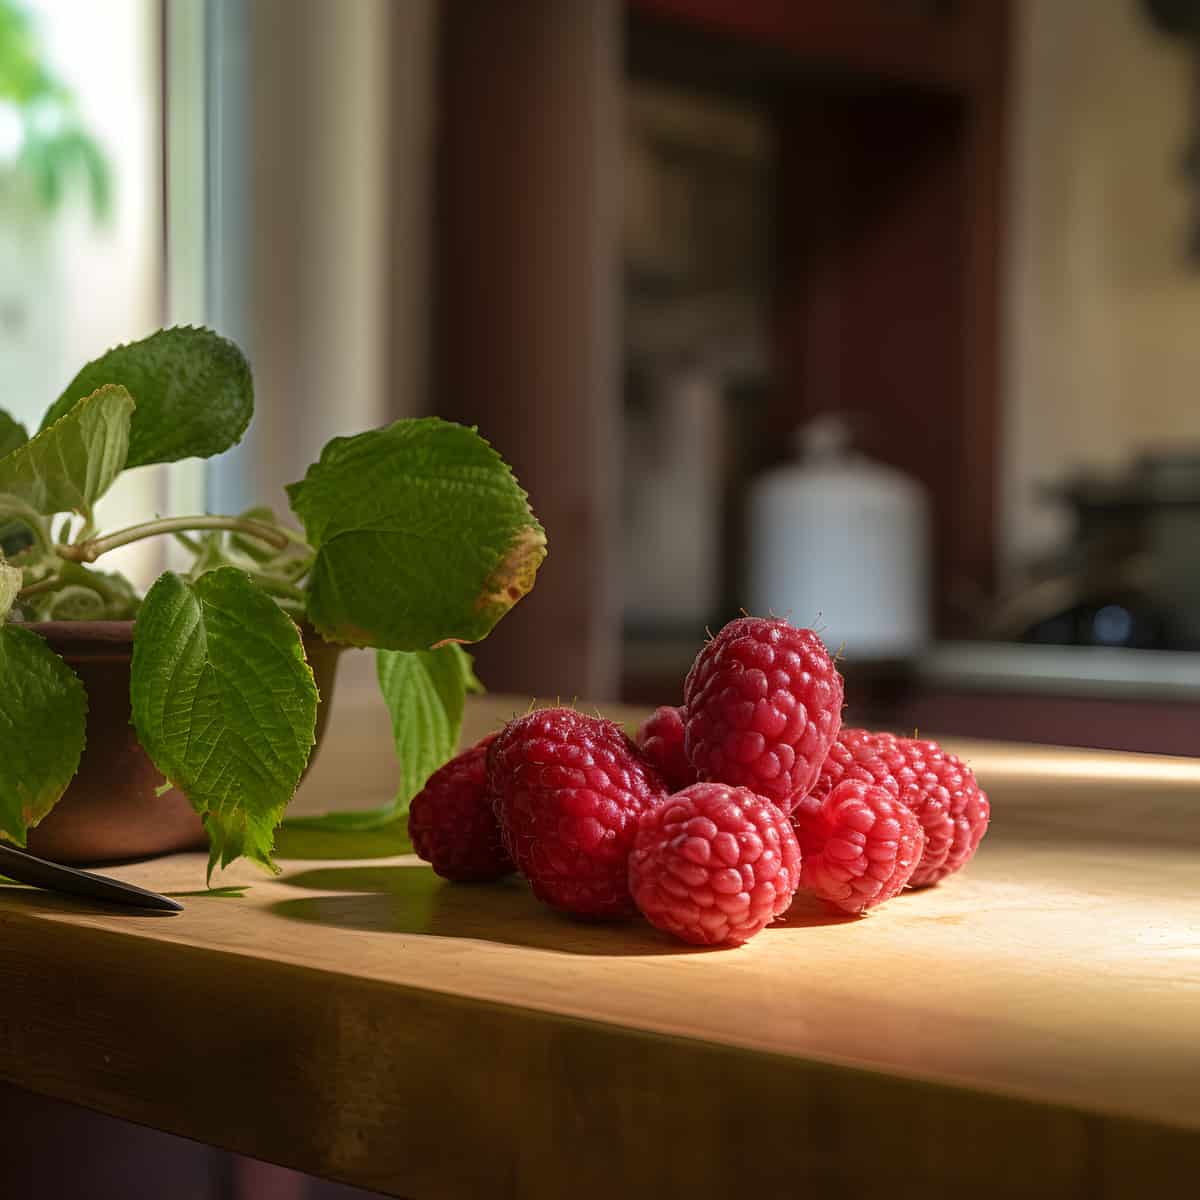 Loganberry on a kitchen counter